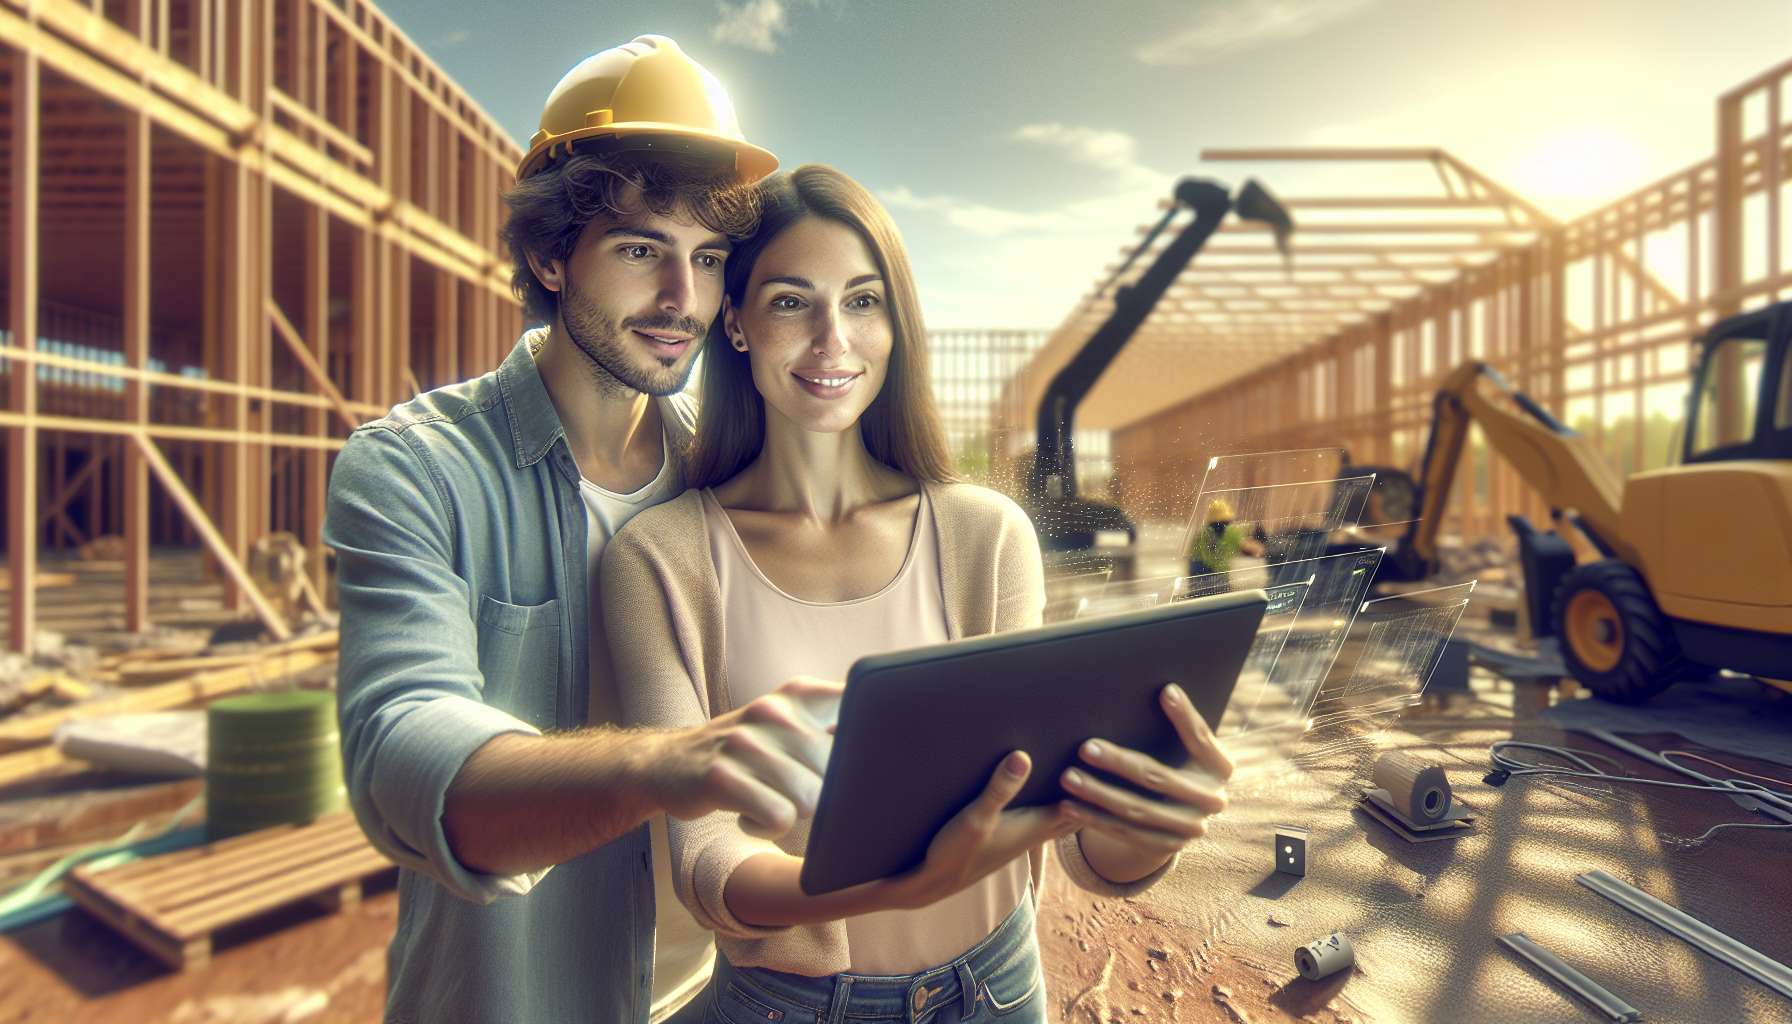 Why Construction Companies Are Betting Big on AR Applications